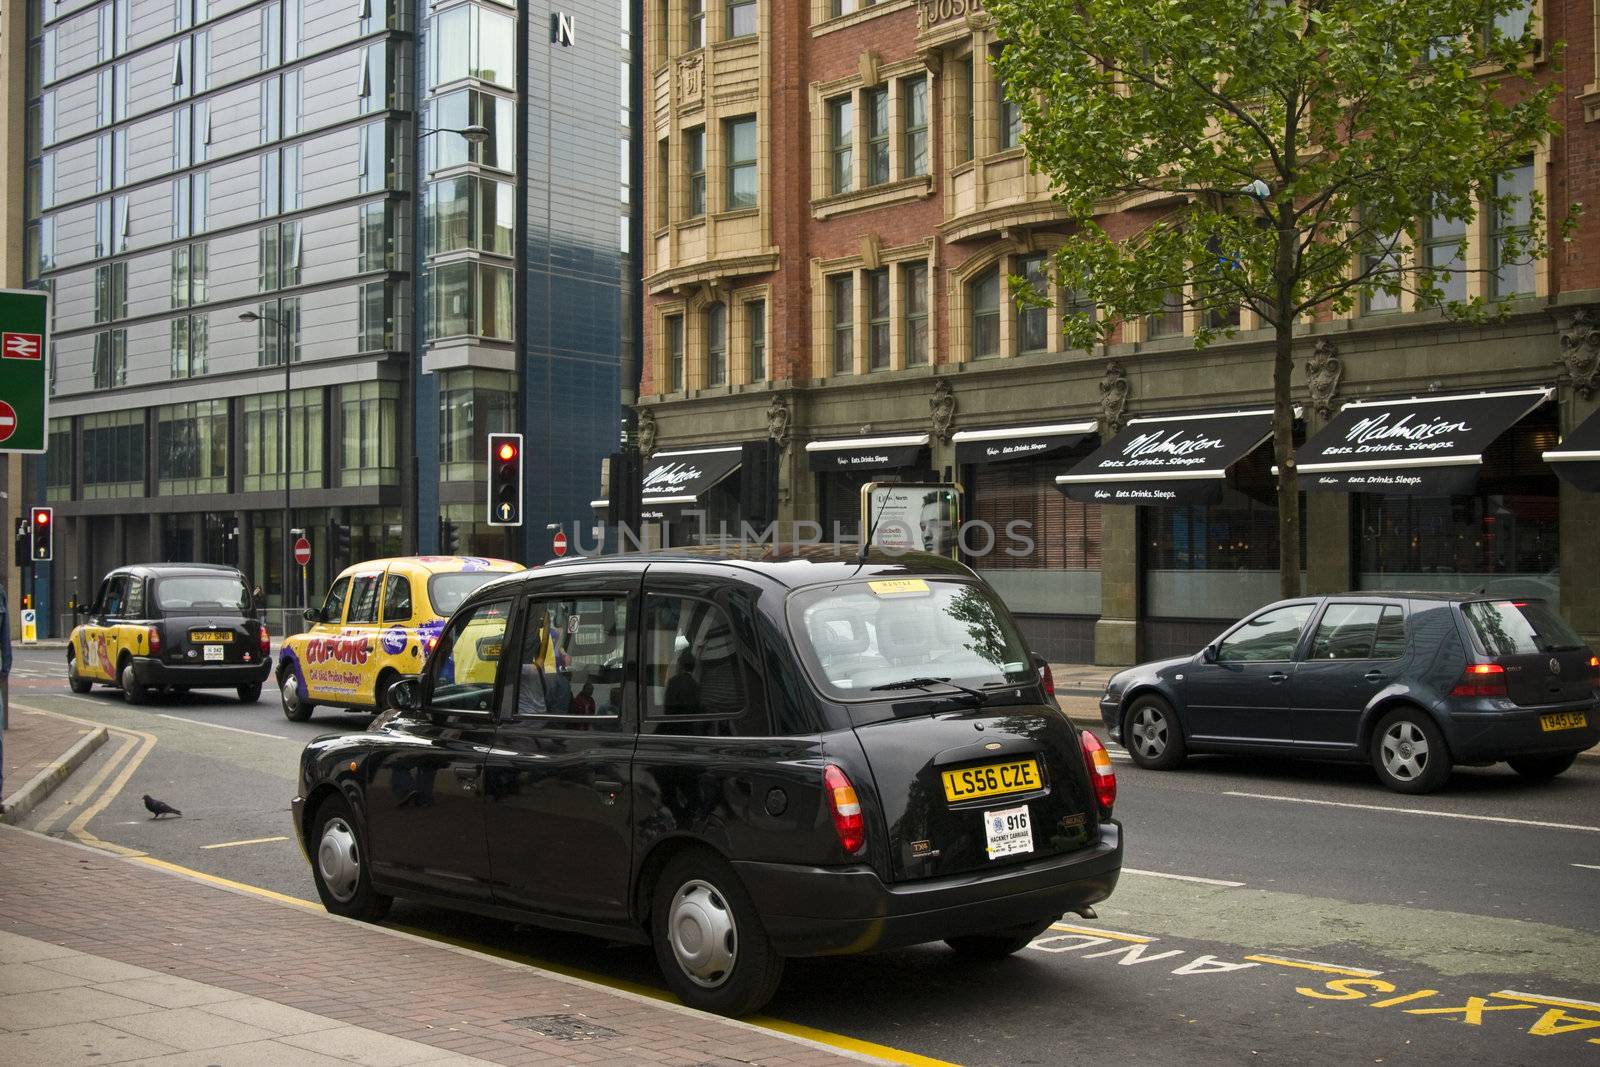 Hackney cabs on a street of Manchester